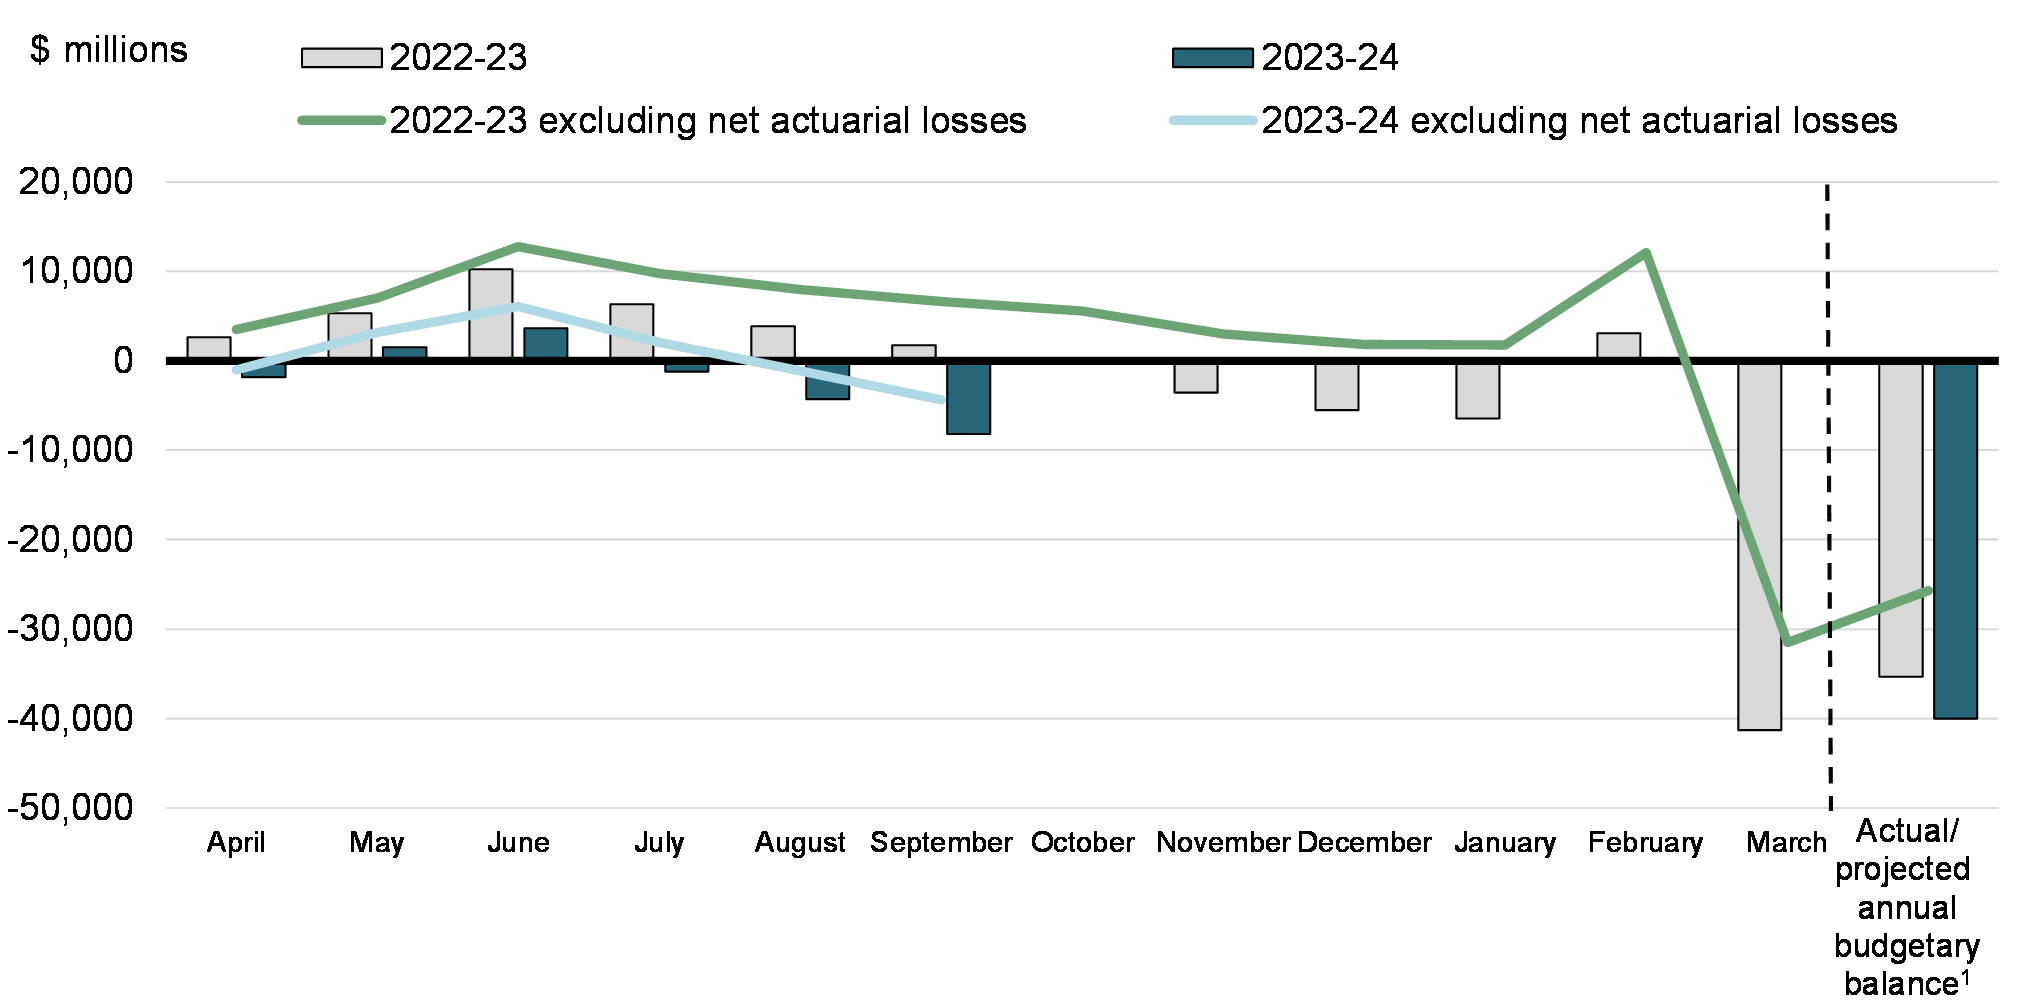 Chart 2: Year-to-Date Budgetary Balance and Budgetary Balance Excluding Net Actuarial Losses